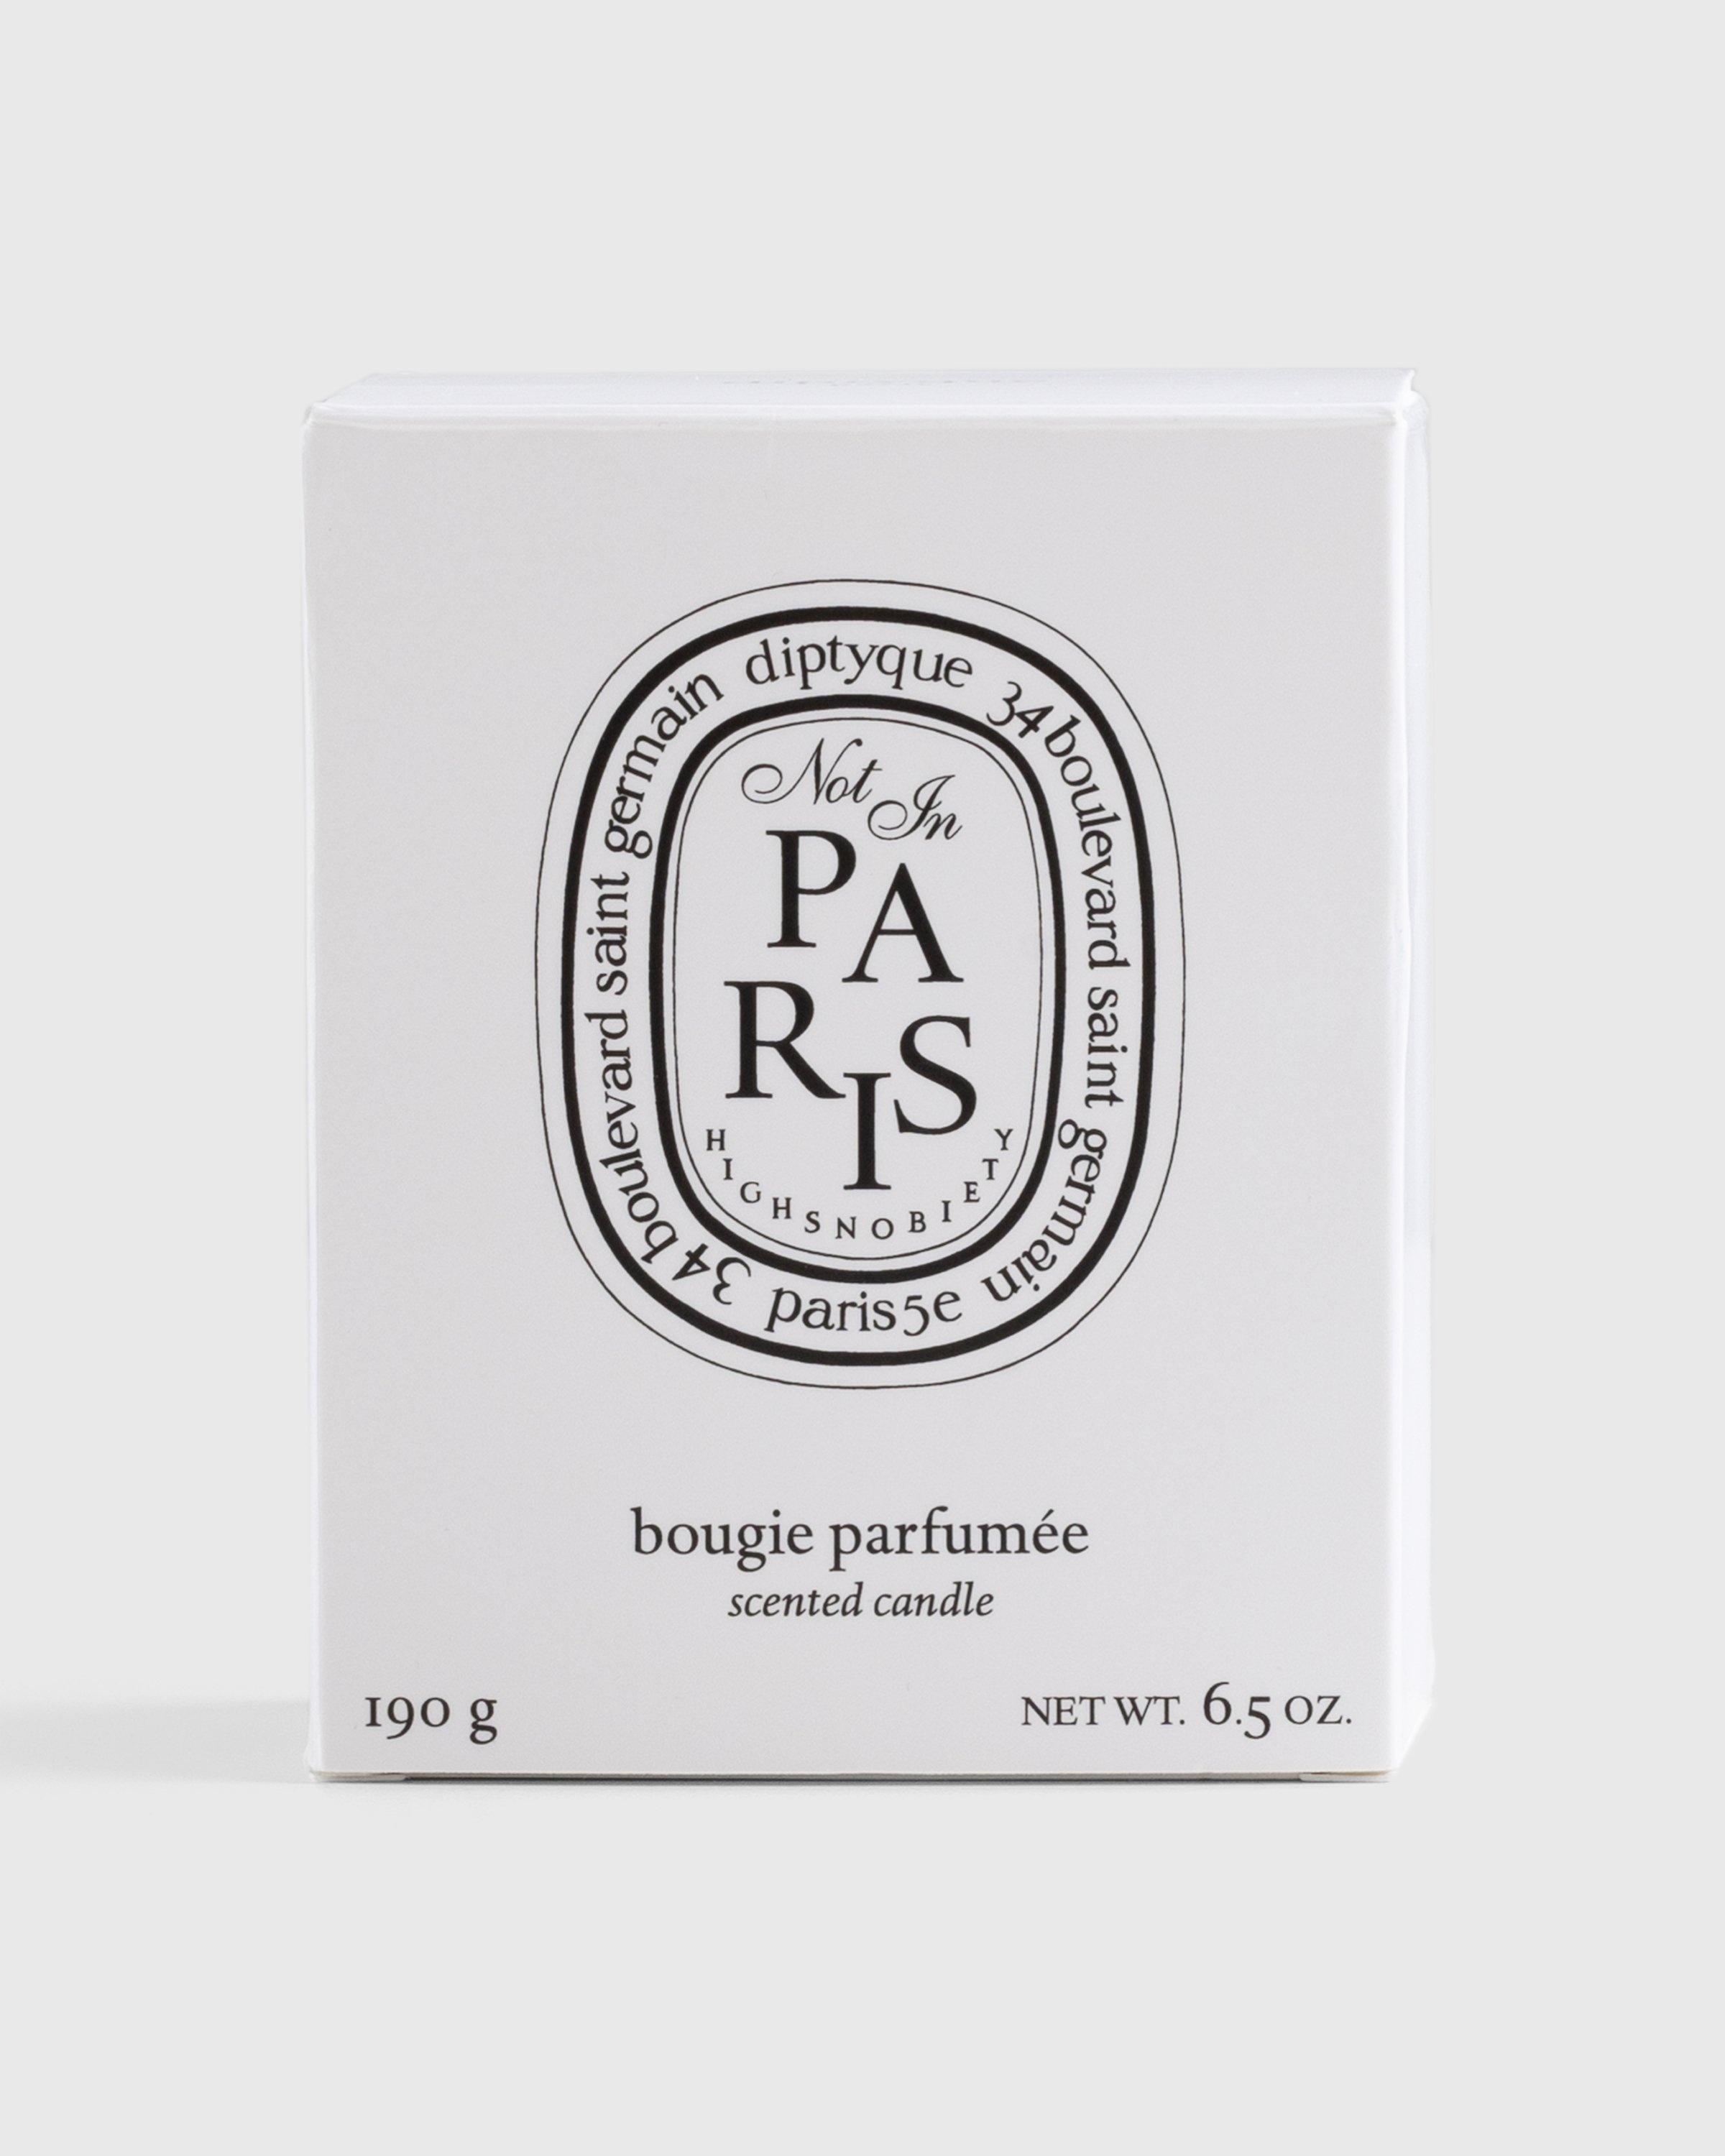 Diptyque x Highsnobiety – Not In Paris 4 Scented Candle White - Candles & Fragrances - White - Image 3